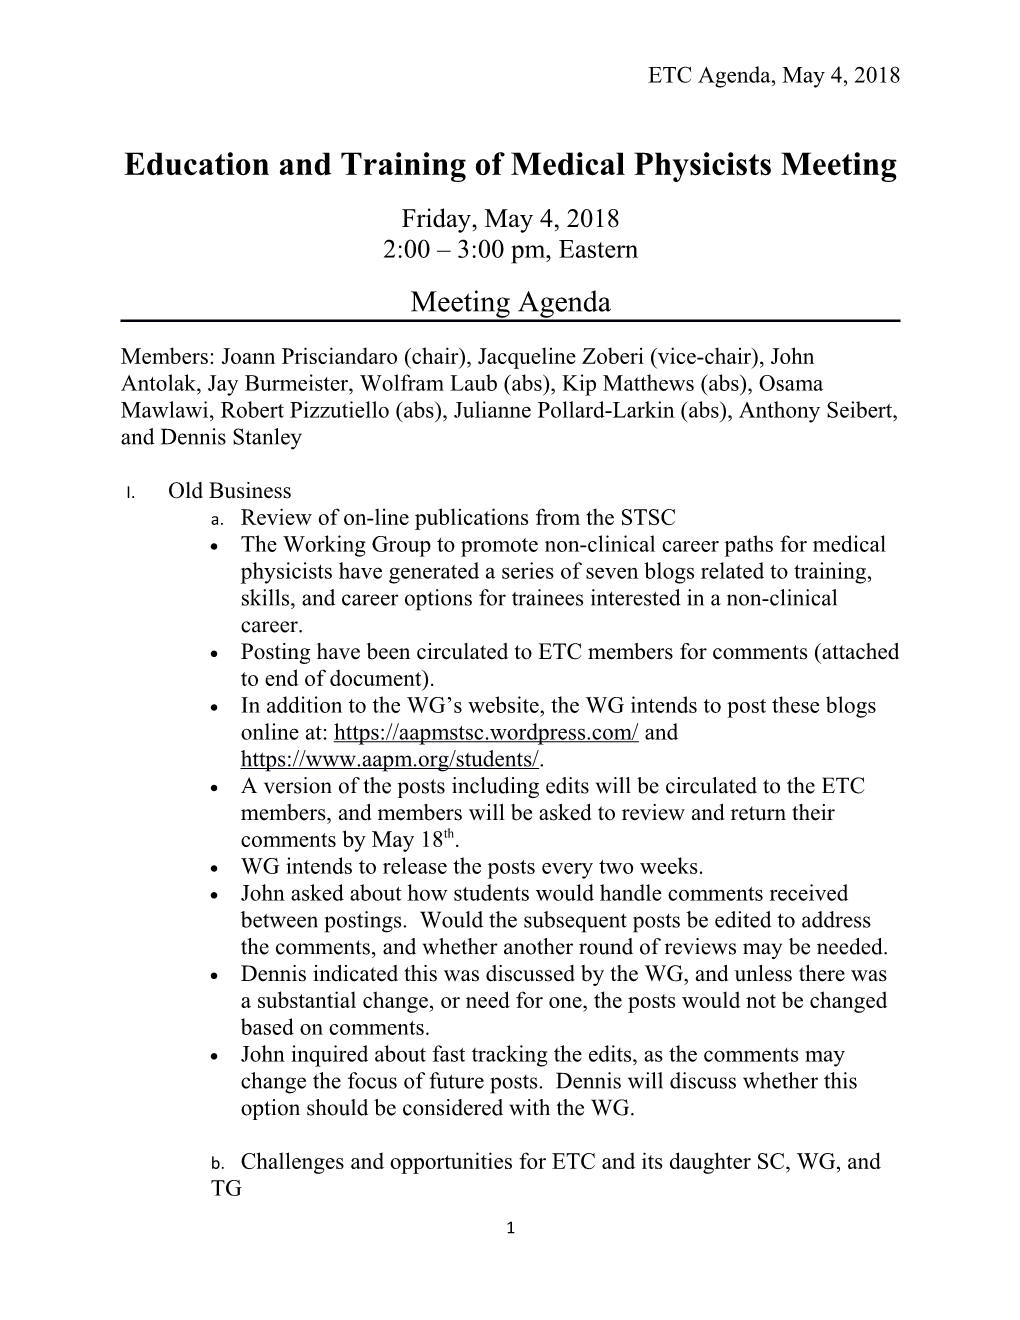 Education and Training of Medical Physicistsmeeting